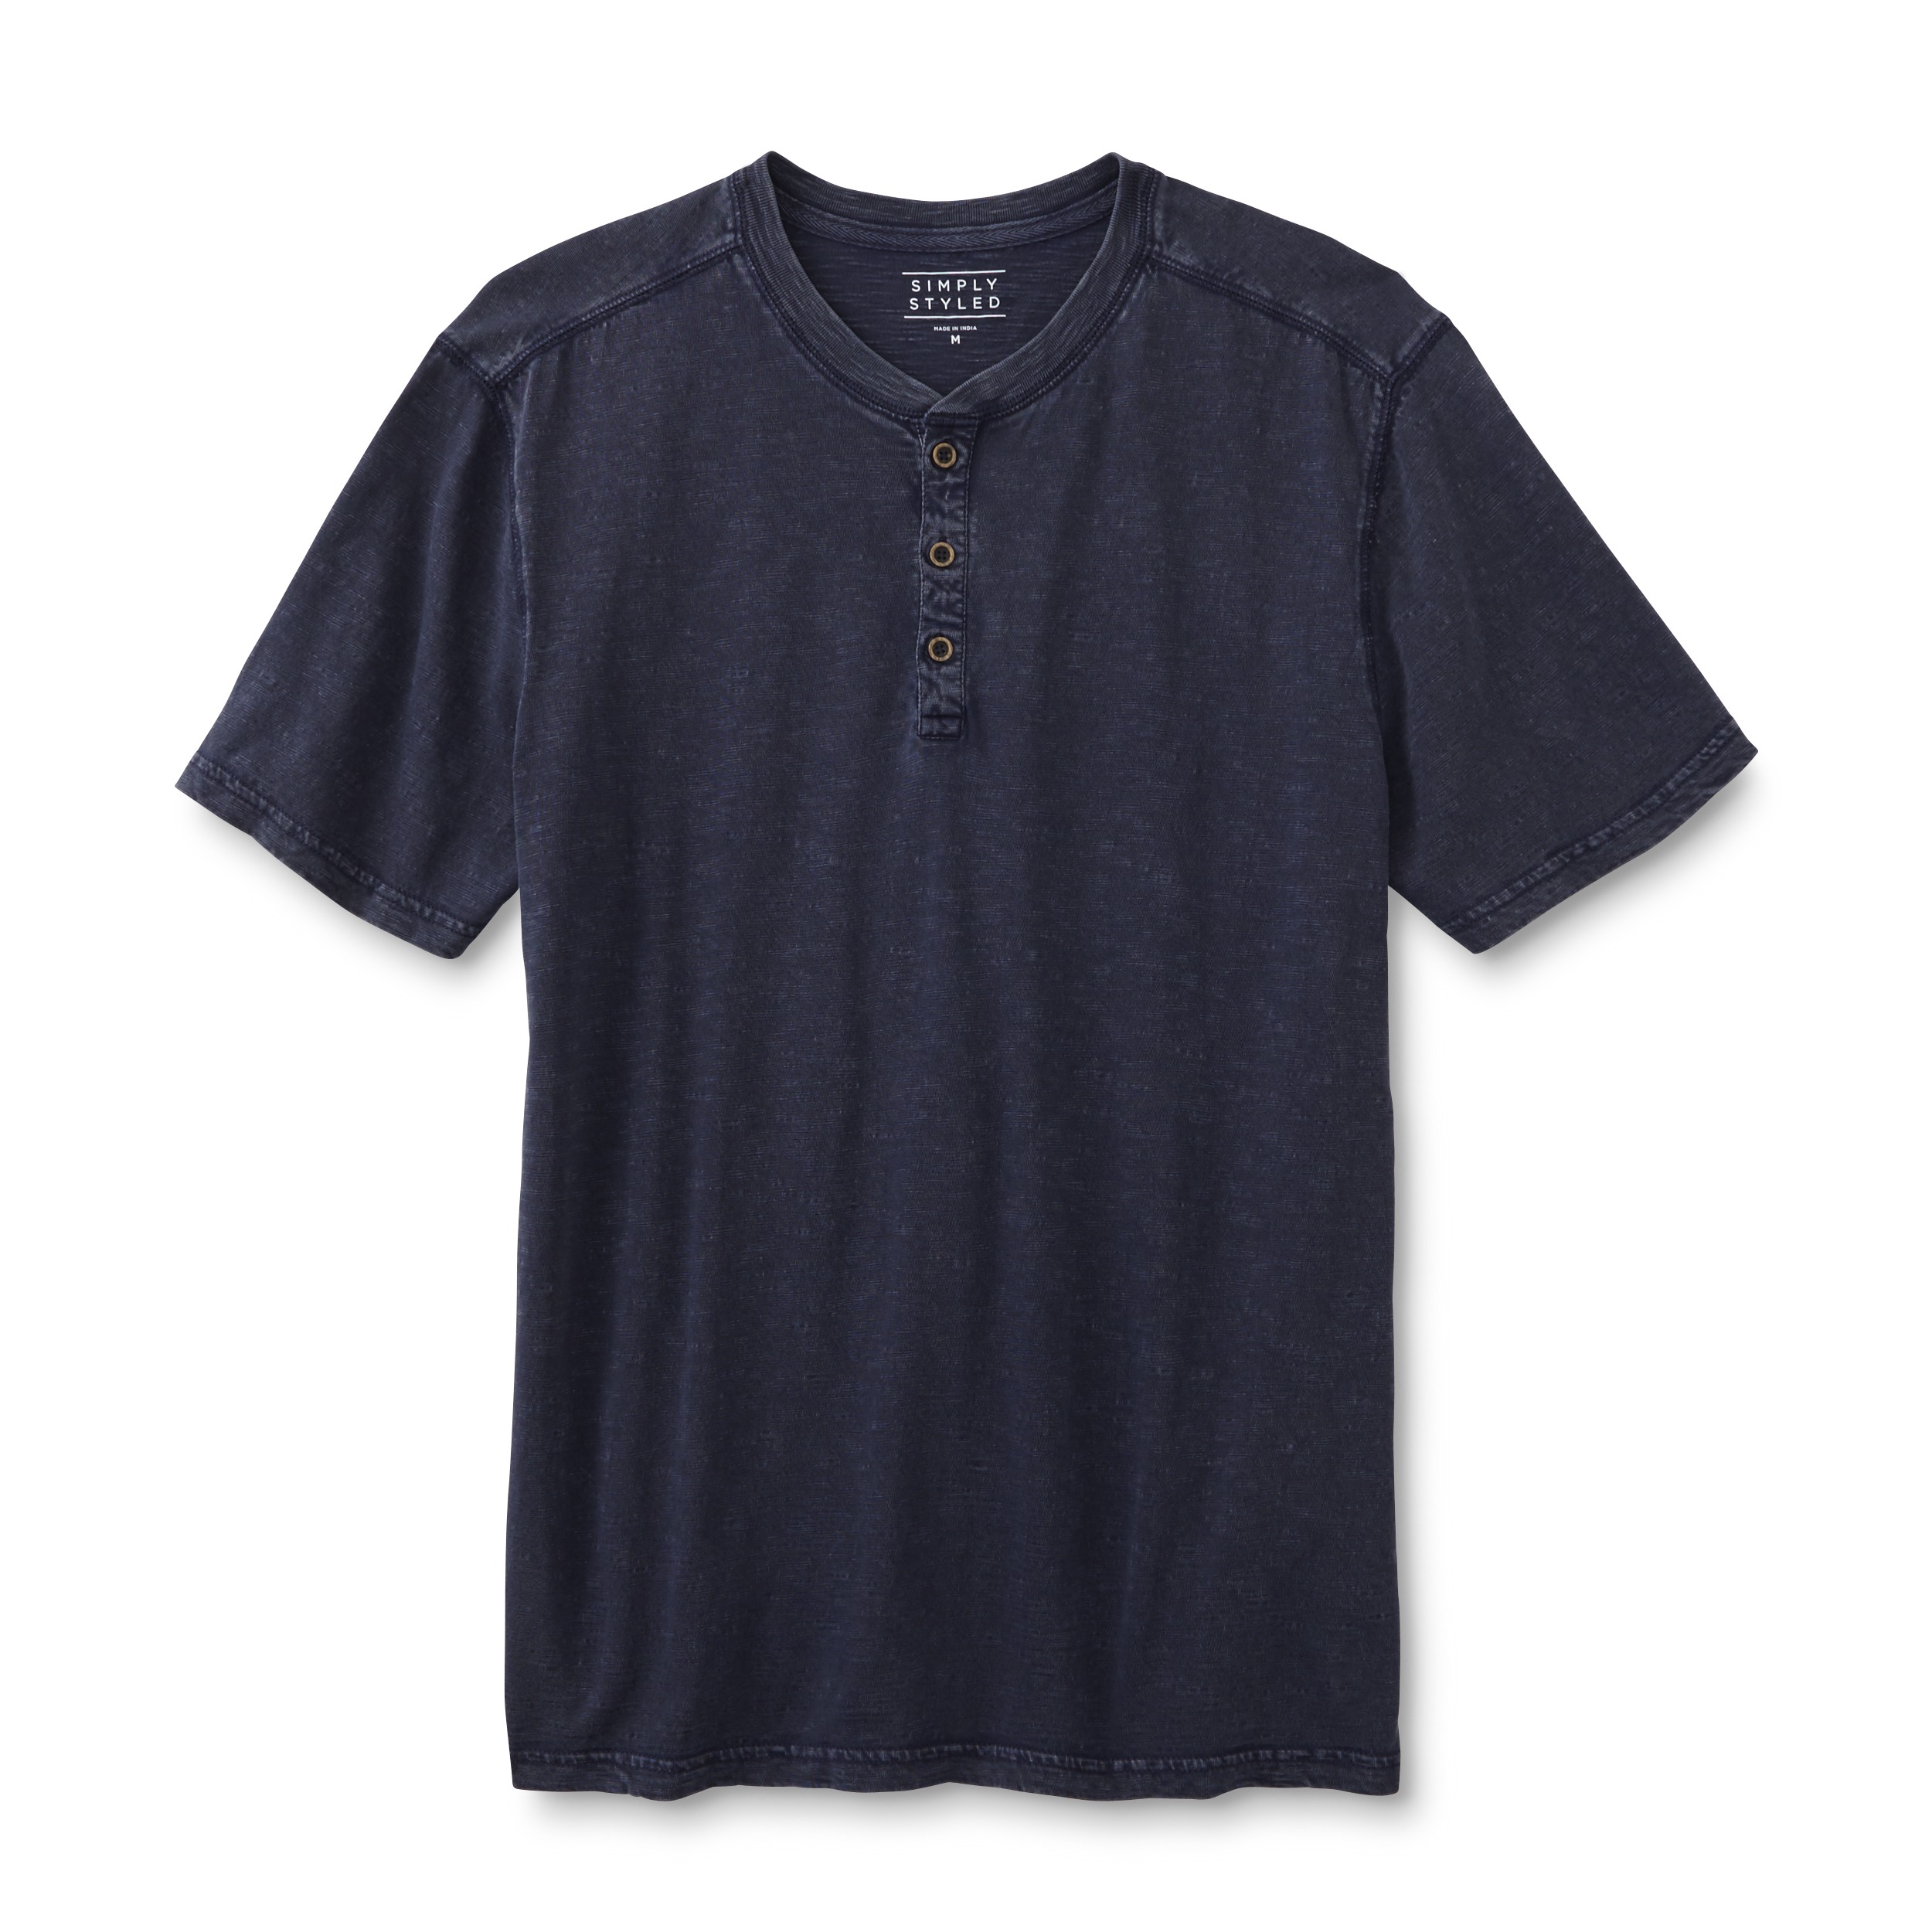 Simply Styled Men's Henley Shirt